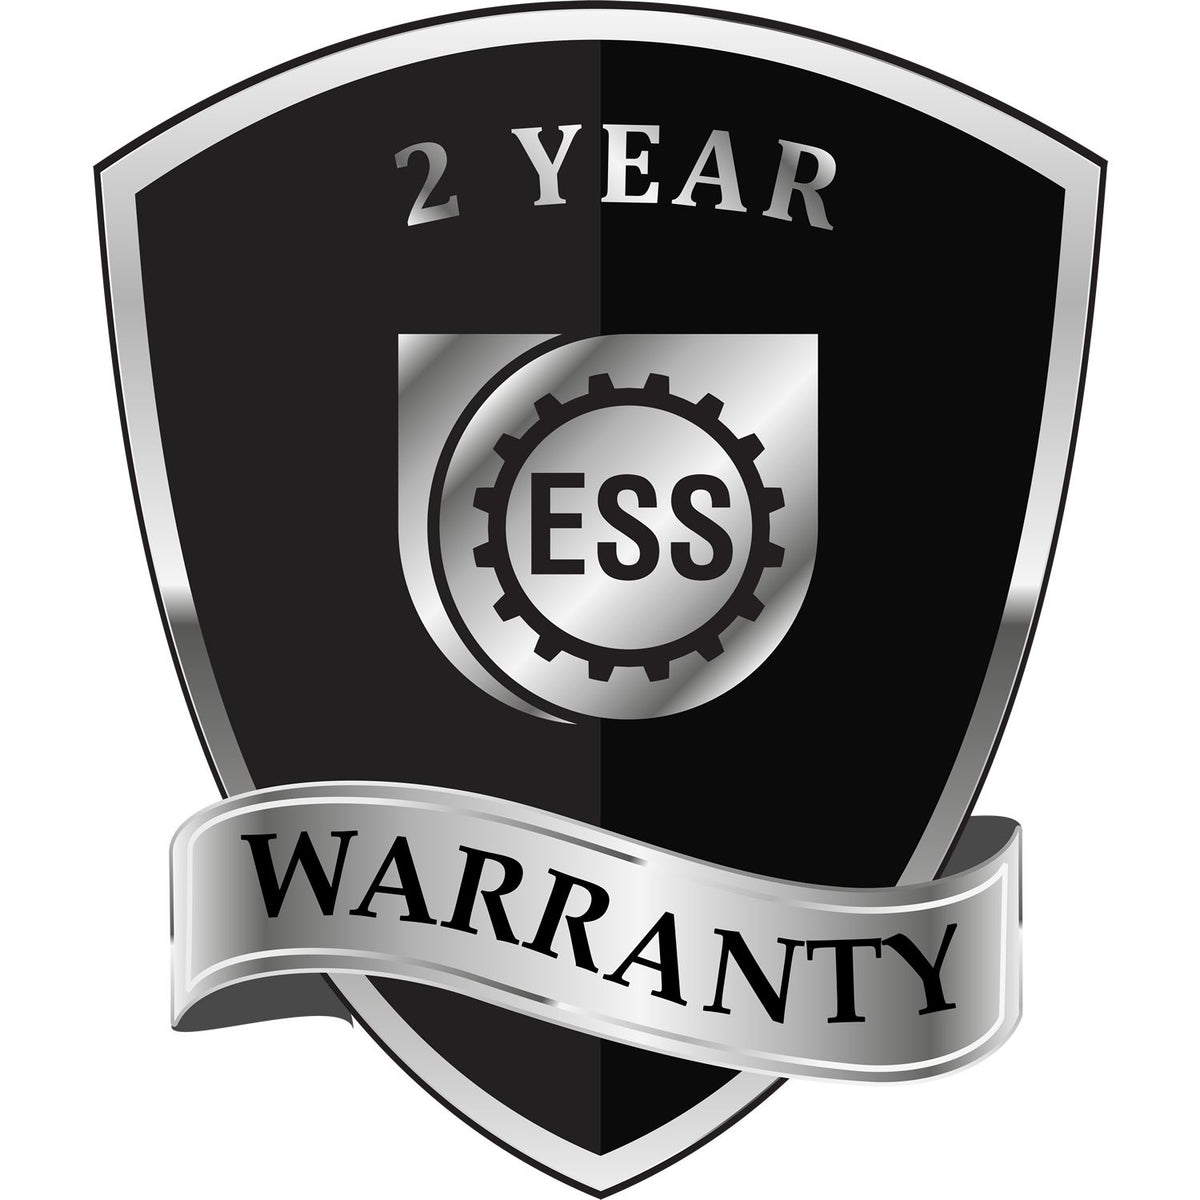 A black and silver badge or emblem showing warranty information for the State of North Carolina Extended Long Reach Geologist Seal